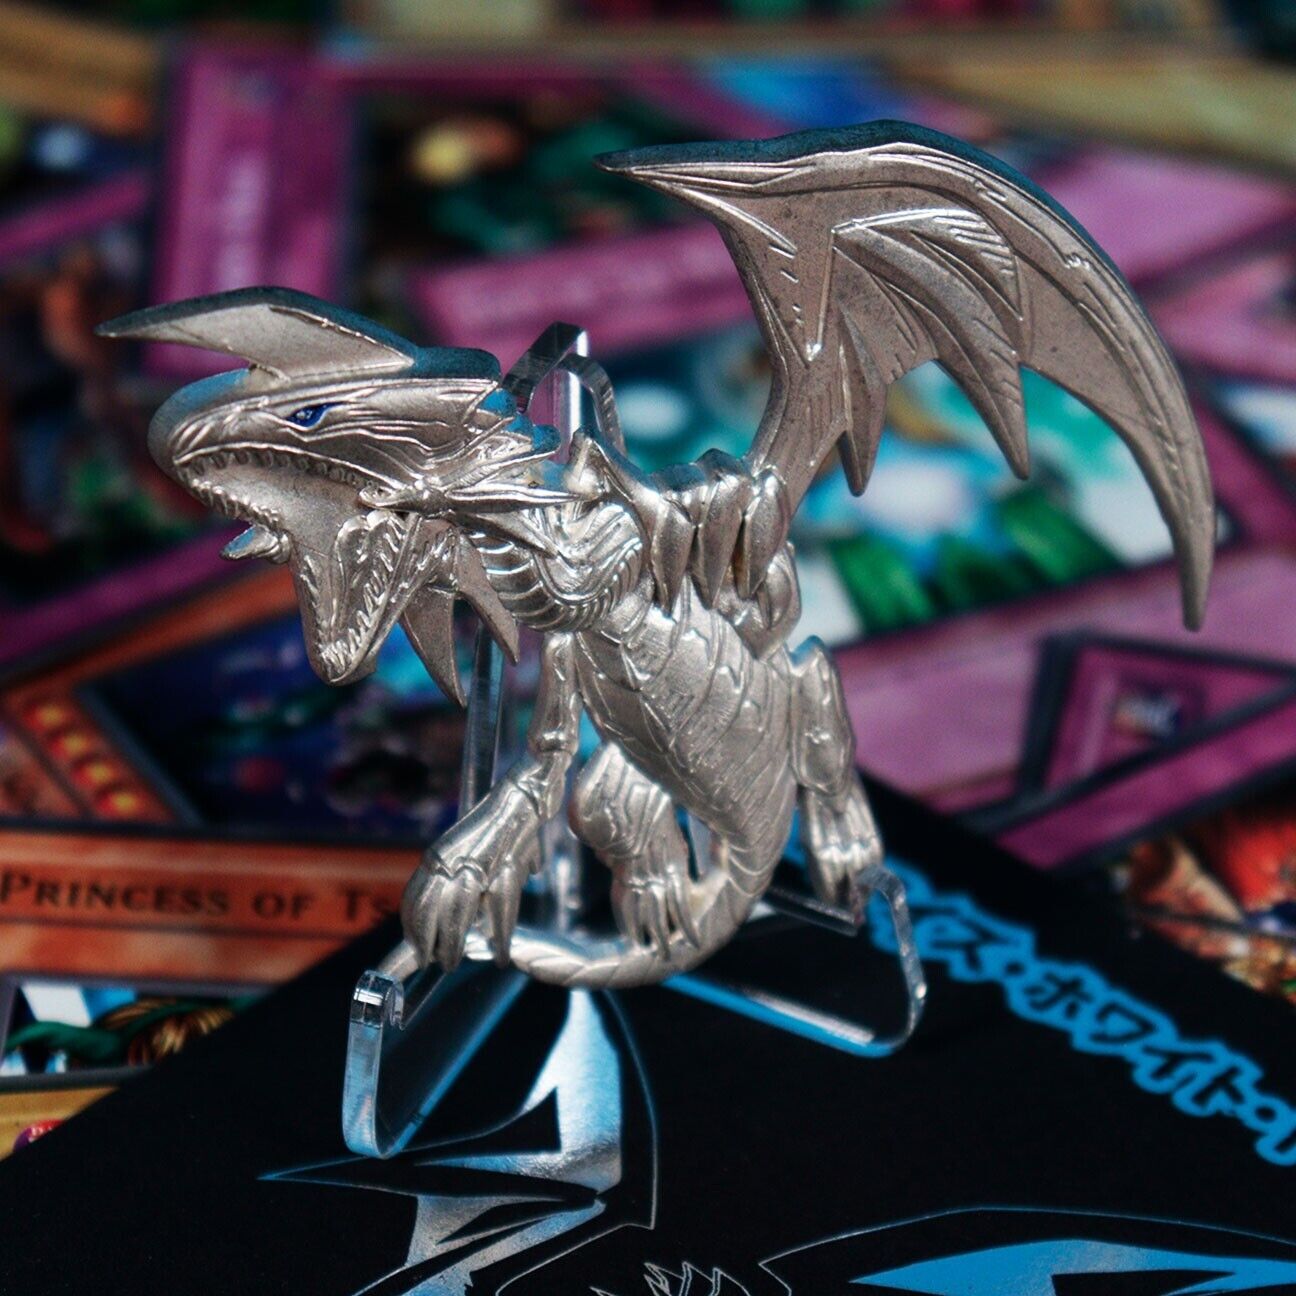 Yu-Gi-Oh! Blue Eyes White Dragon Limited Edition .999 Silver Plated XL Pin Badge